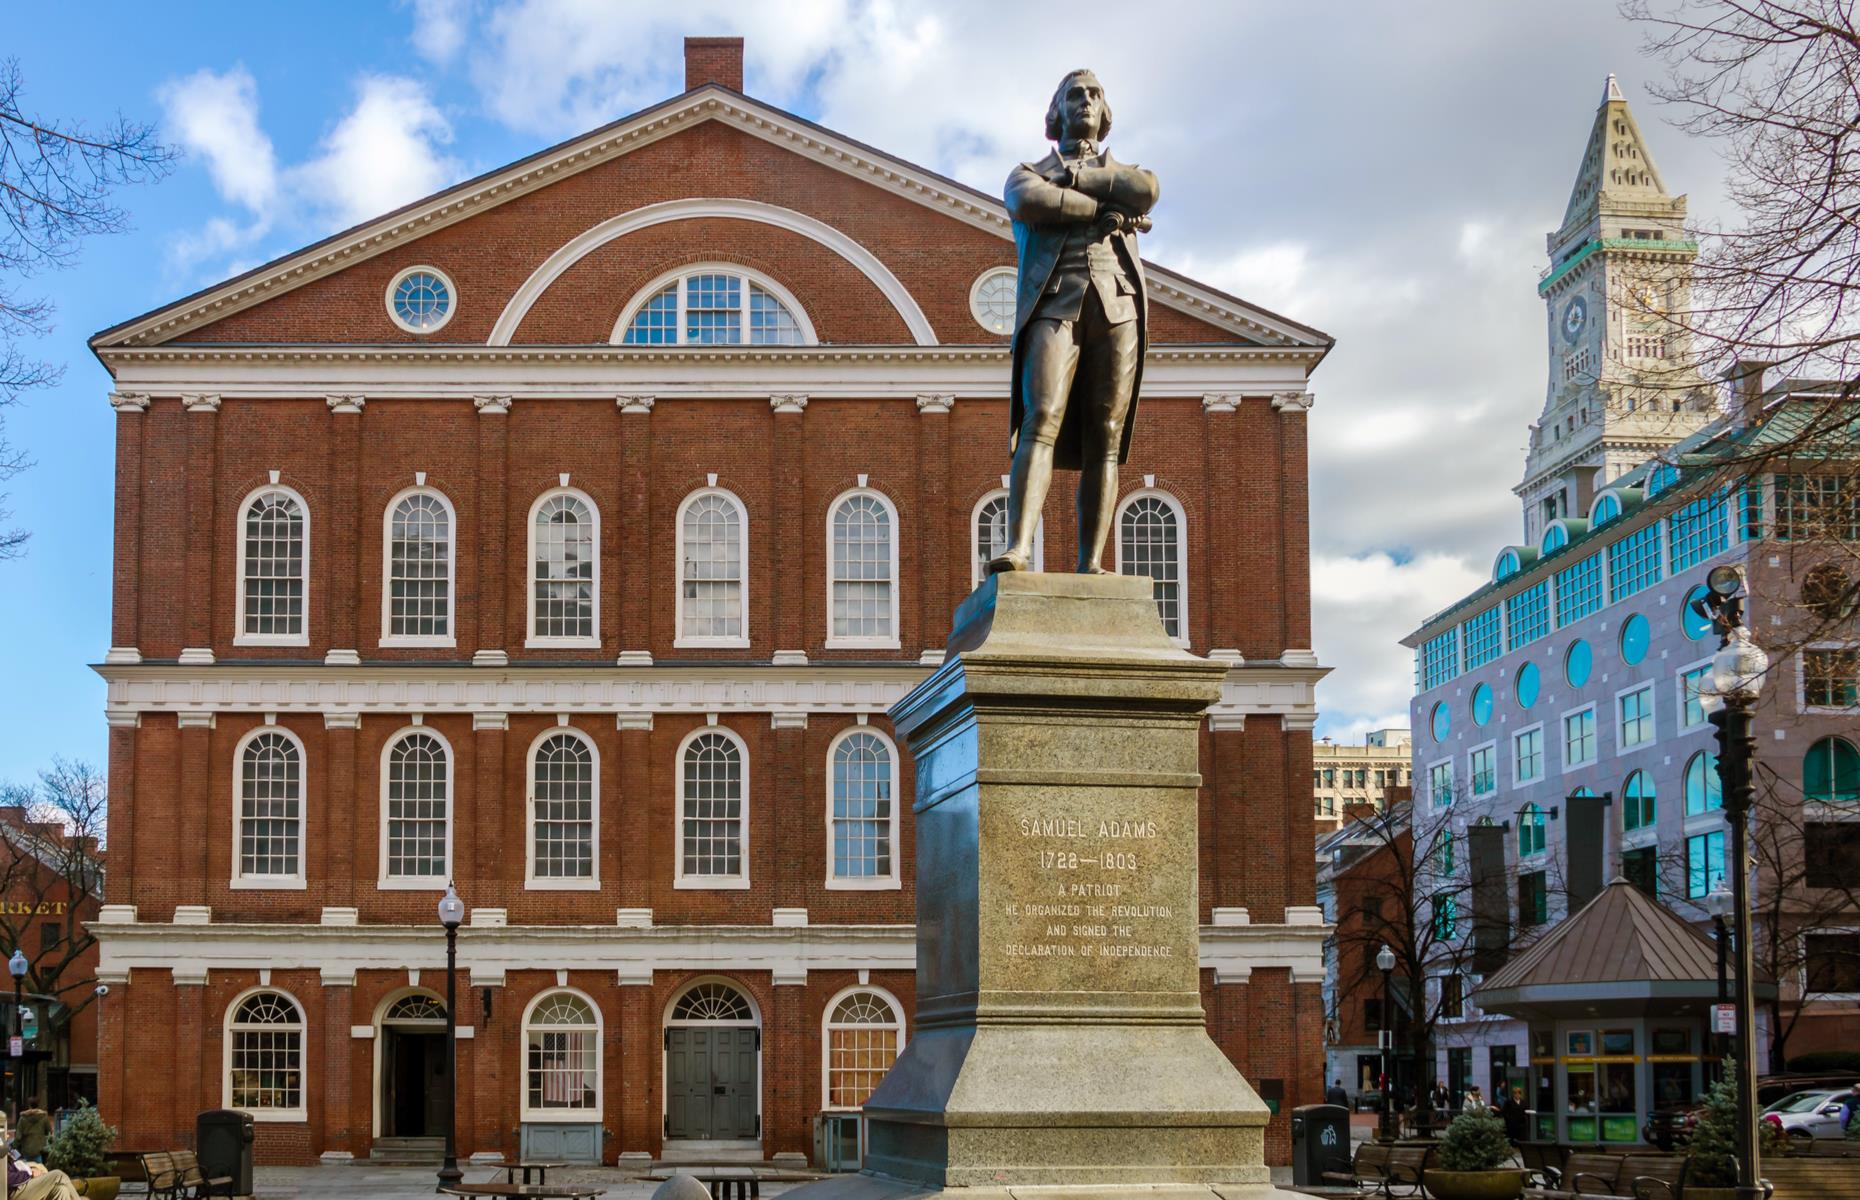 <p>You'll see 16 of America's most important historical attractions along Boston's <a href="https://www.thefreedomtrail.org/trail-sites">Freedom Trail</a>, joined up by a 2.5-mile (4km) red line that winds through the city. The trail weaves from Boston Common, the oldest public park in America, north towards the Bunker Hill Monument, commemorating the Battle of Bunker Hill, one of the earliest major conflicts in the Revolutionary War. </p>  <p><a href="https://www.loveexploring.com/guides/76558/explore-boston-the-top-things-to-do-where-to-stay-what-to-eat"><strong>Experience Boston with our guide to the city</strong></a></p>